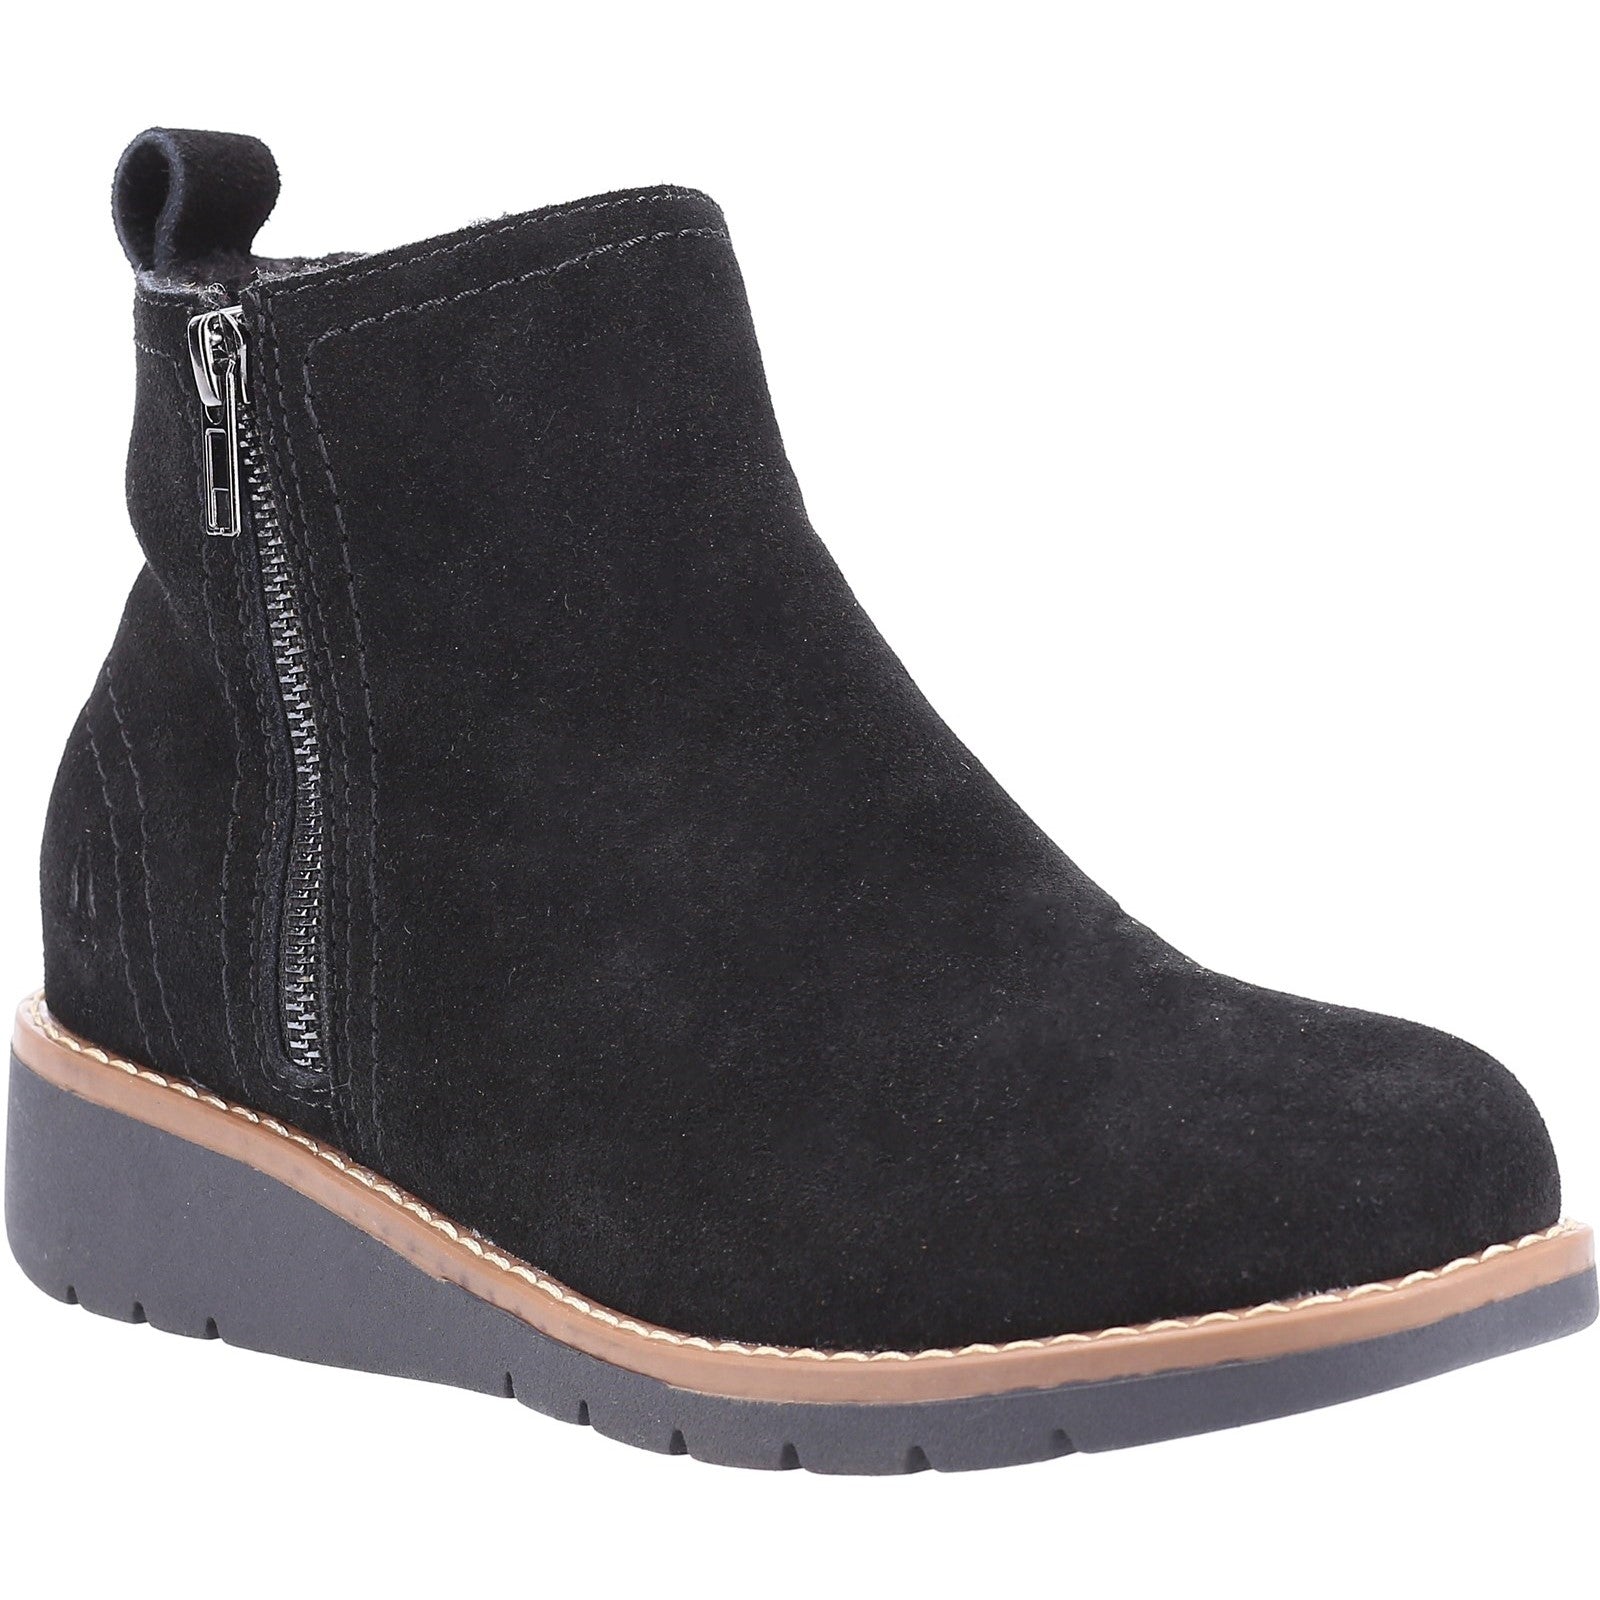 Ladies Ankle Boots Black Hush Puppies Libby Boot